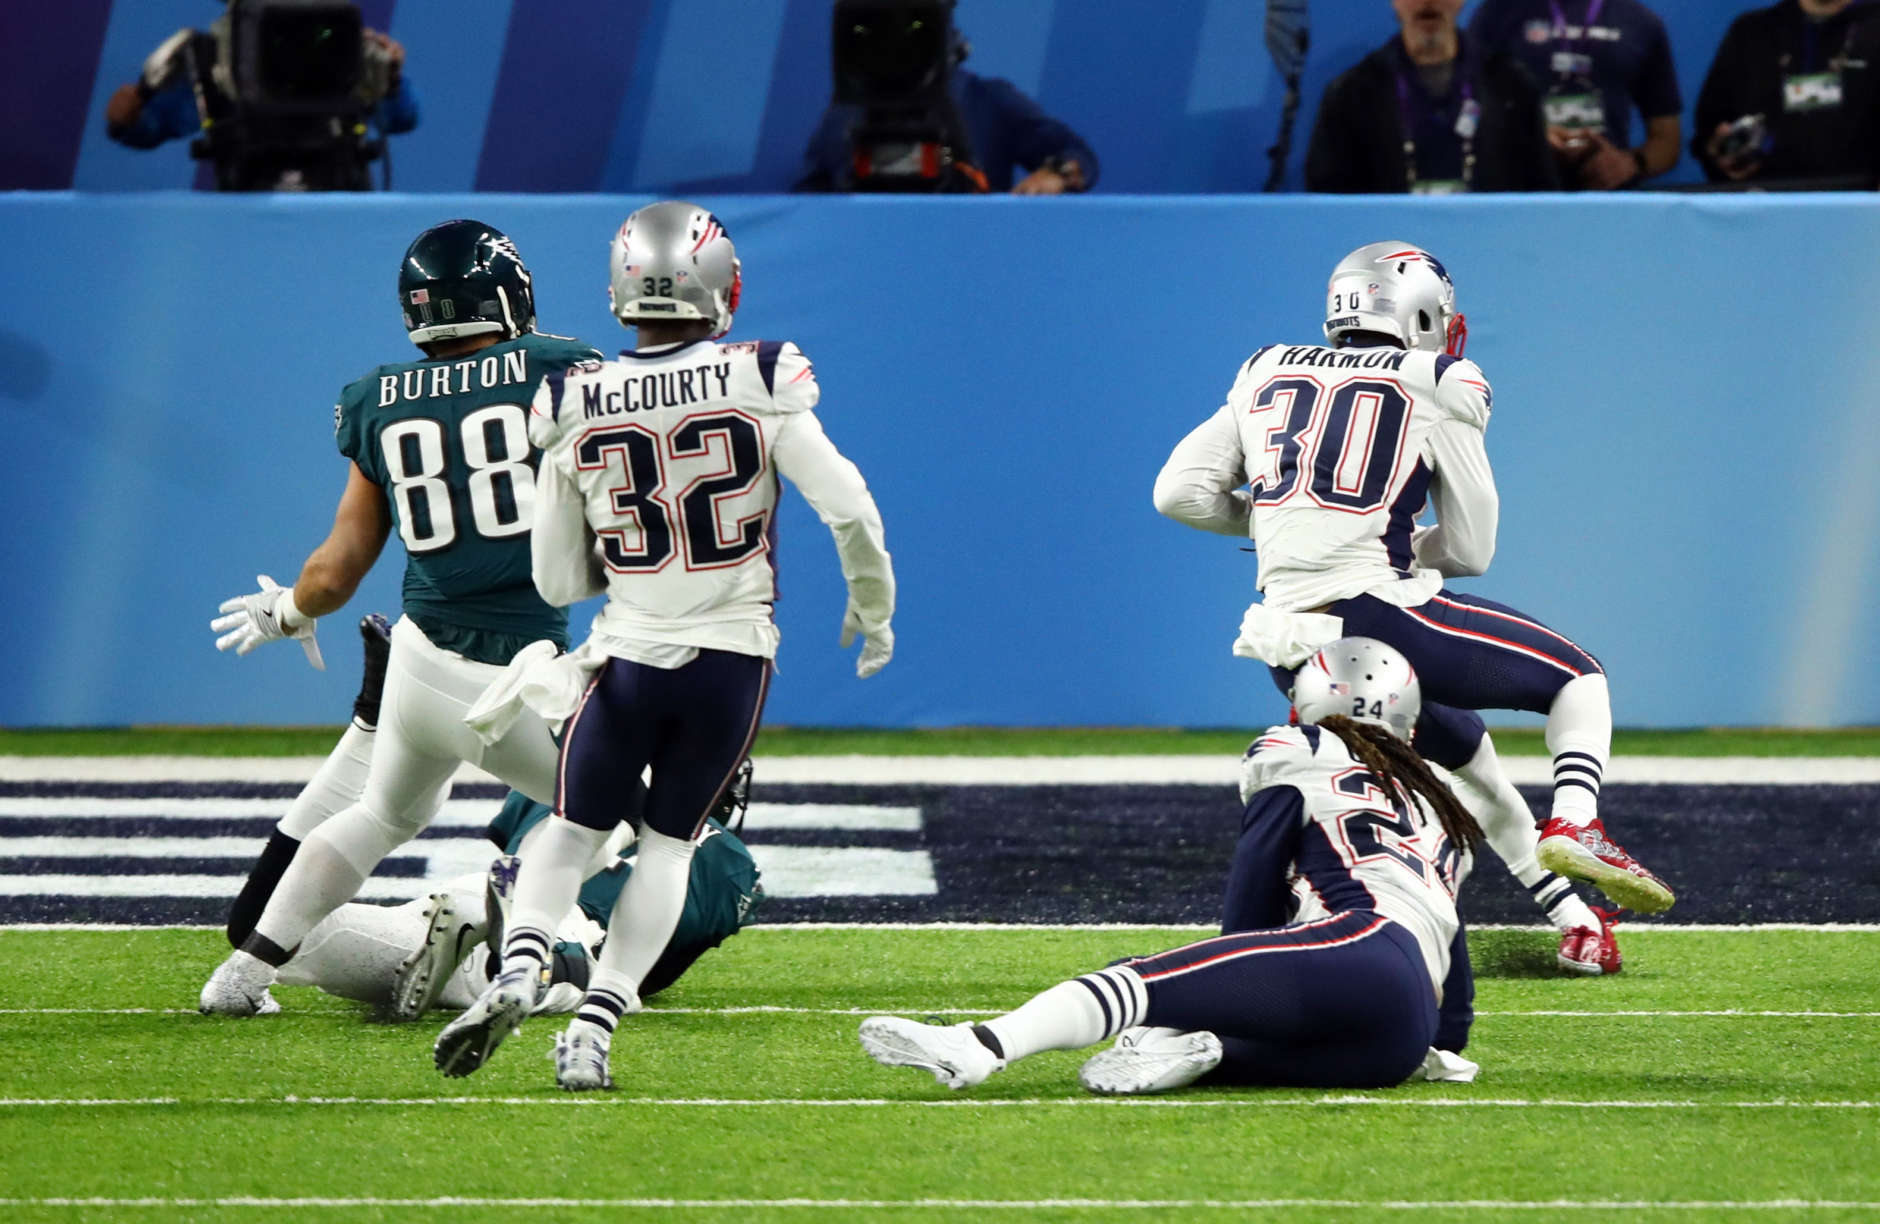 MINNEAPOLIS, MN - FEBRUARY 04:  Duron Harmon #30 of the New England Patriots intercepts the pass against the Philadelphia Eagles during the second quarter in Super Bowl LII at U.S. Bank Stadium on February 4, 2018 in Minneapolis, Minnesota.  (Photo by Gregory Shamus/Getty Images)